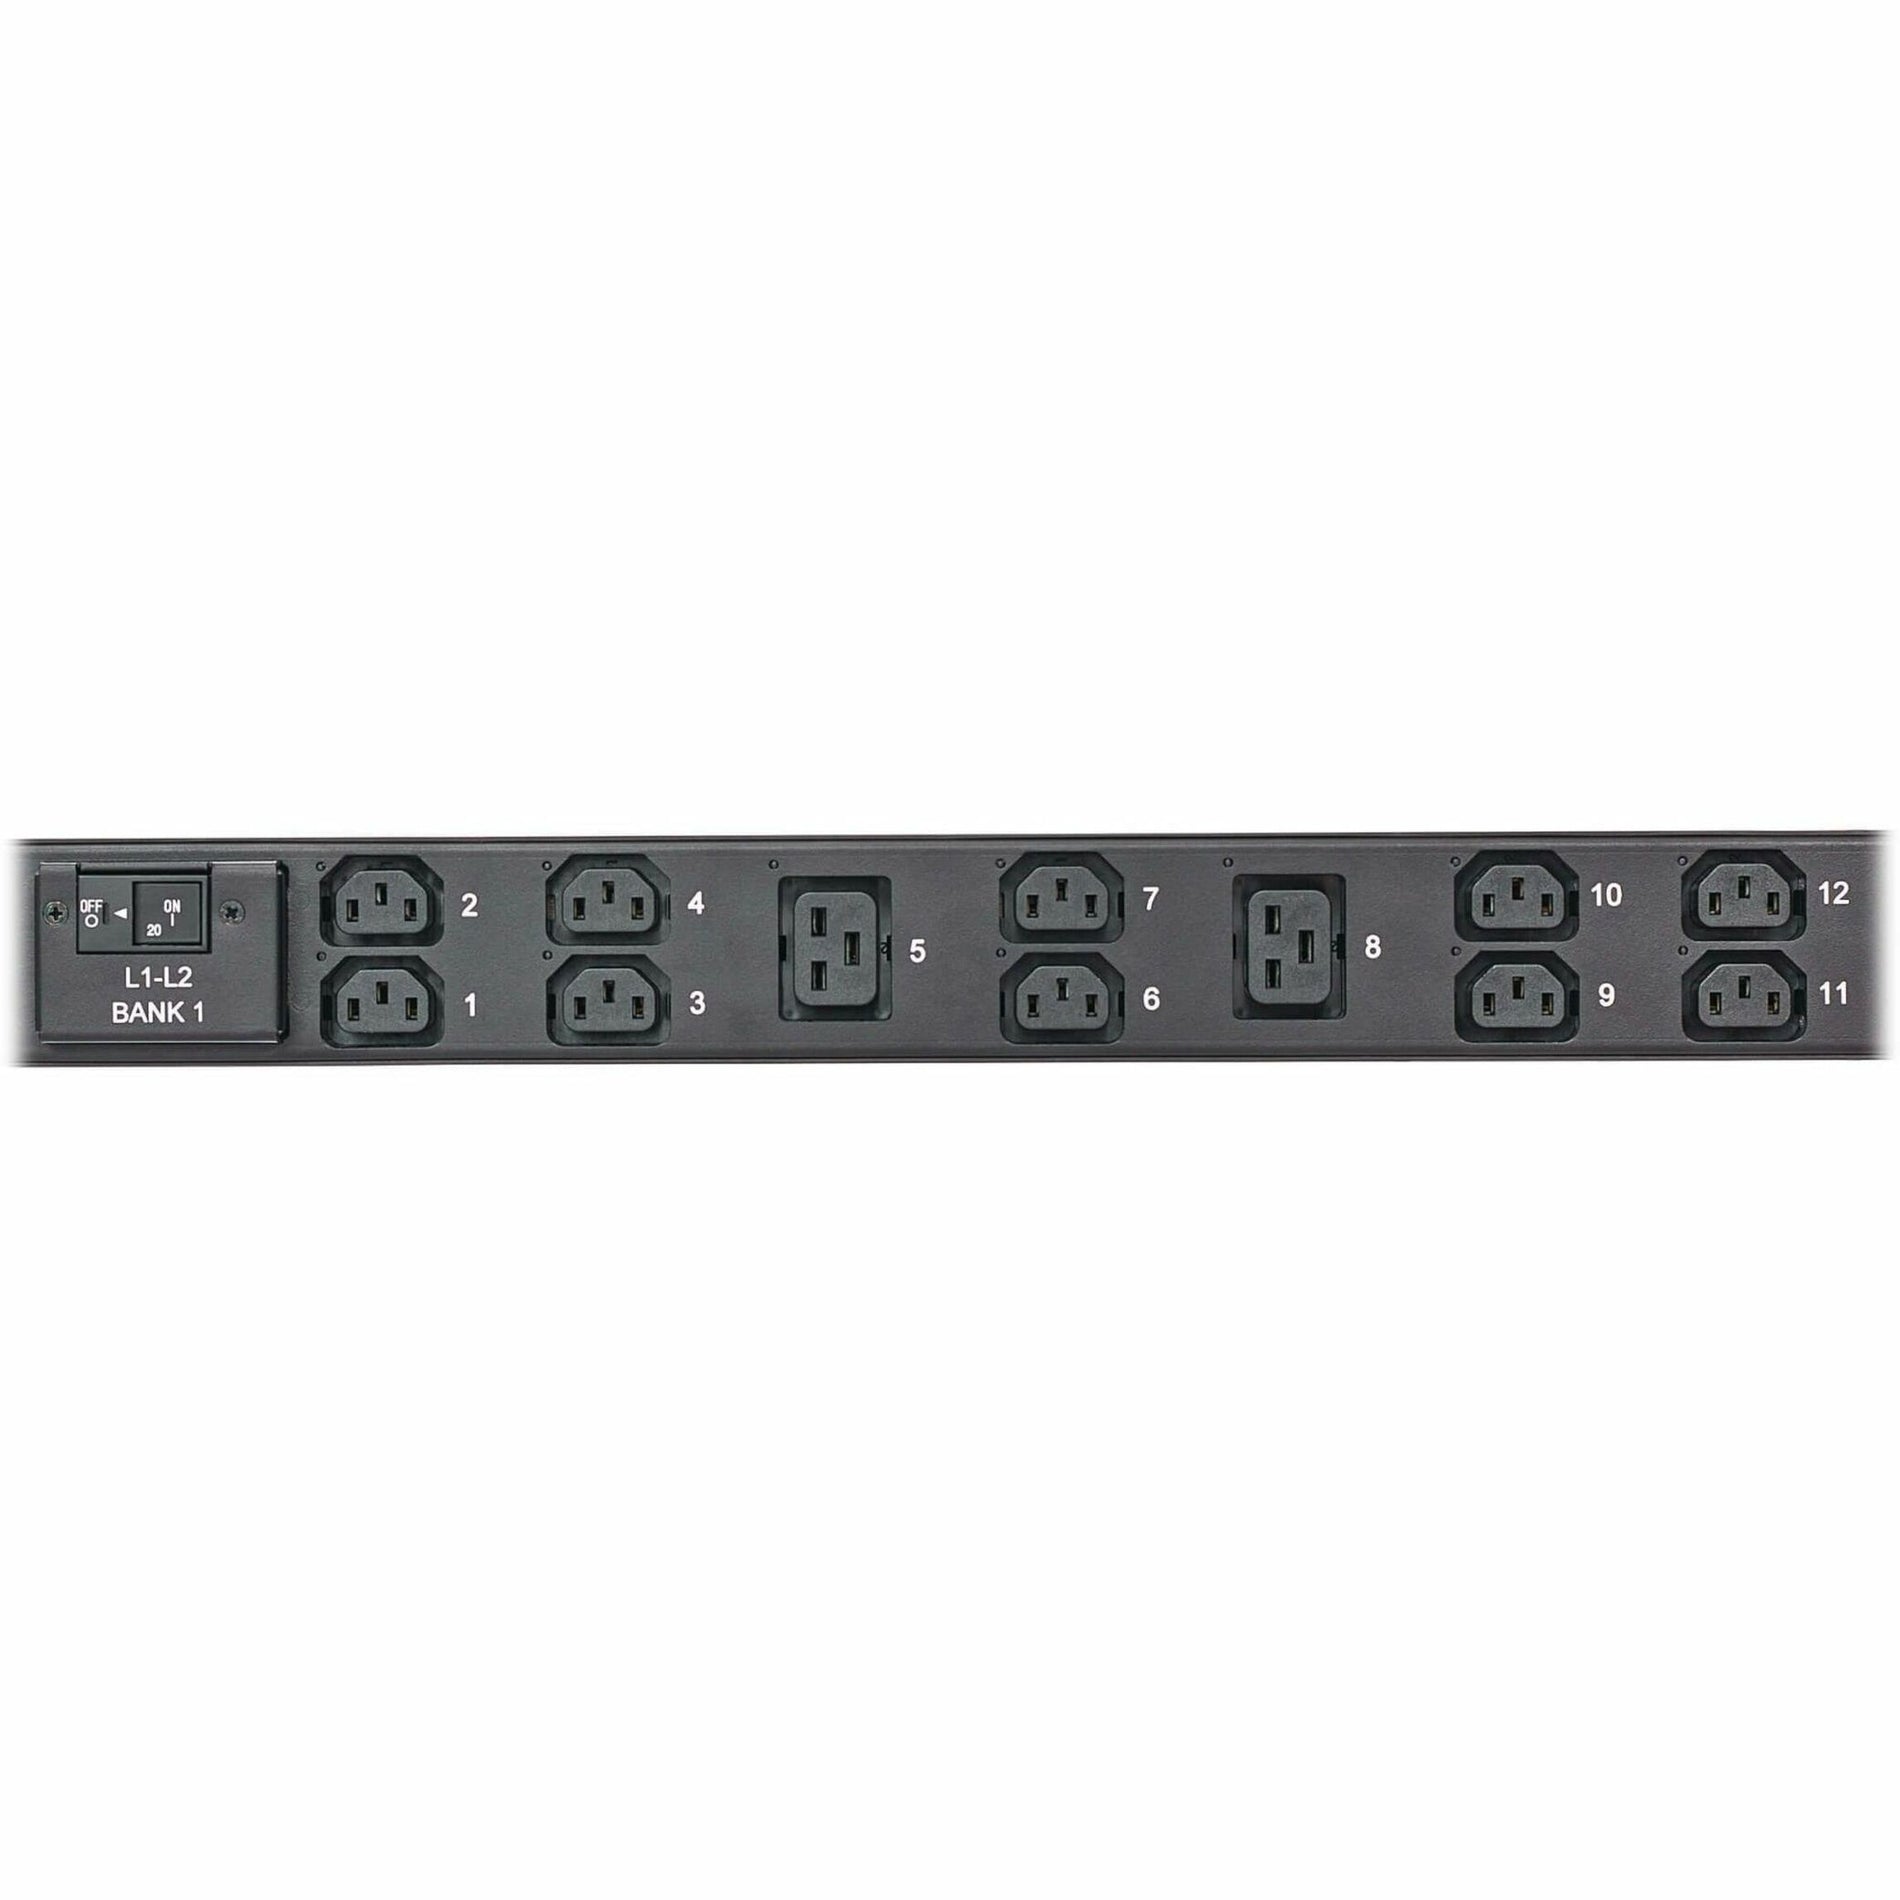 Tripp Lite PDU3EVSR1G60 36-Outlets PDU 12.60 kW Power Rating Managed Switched Overload Protection